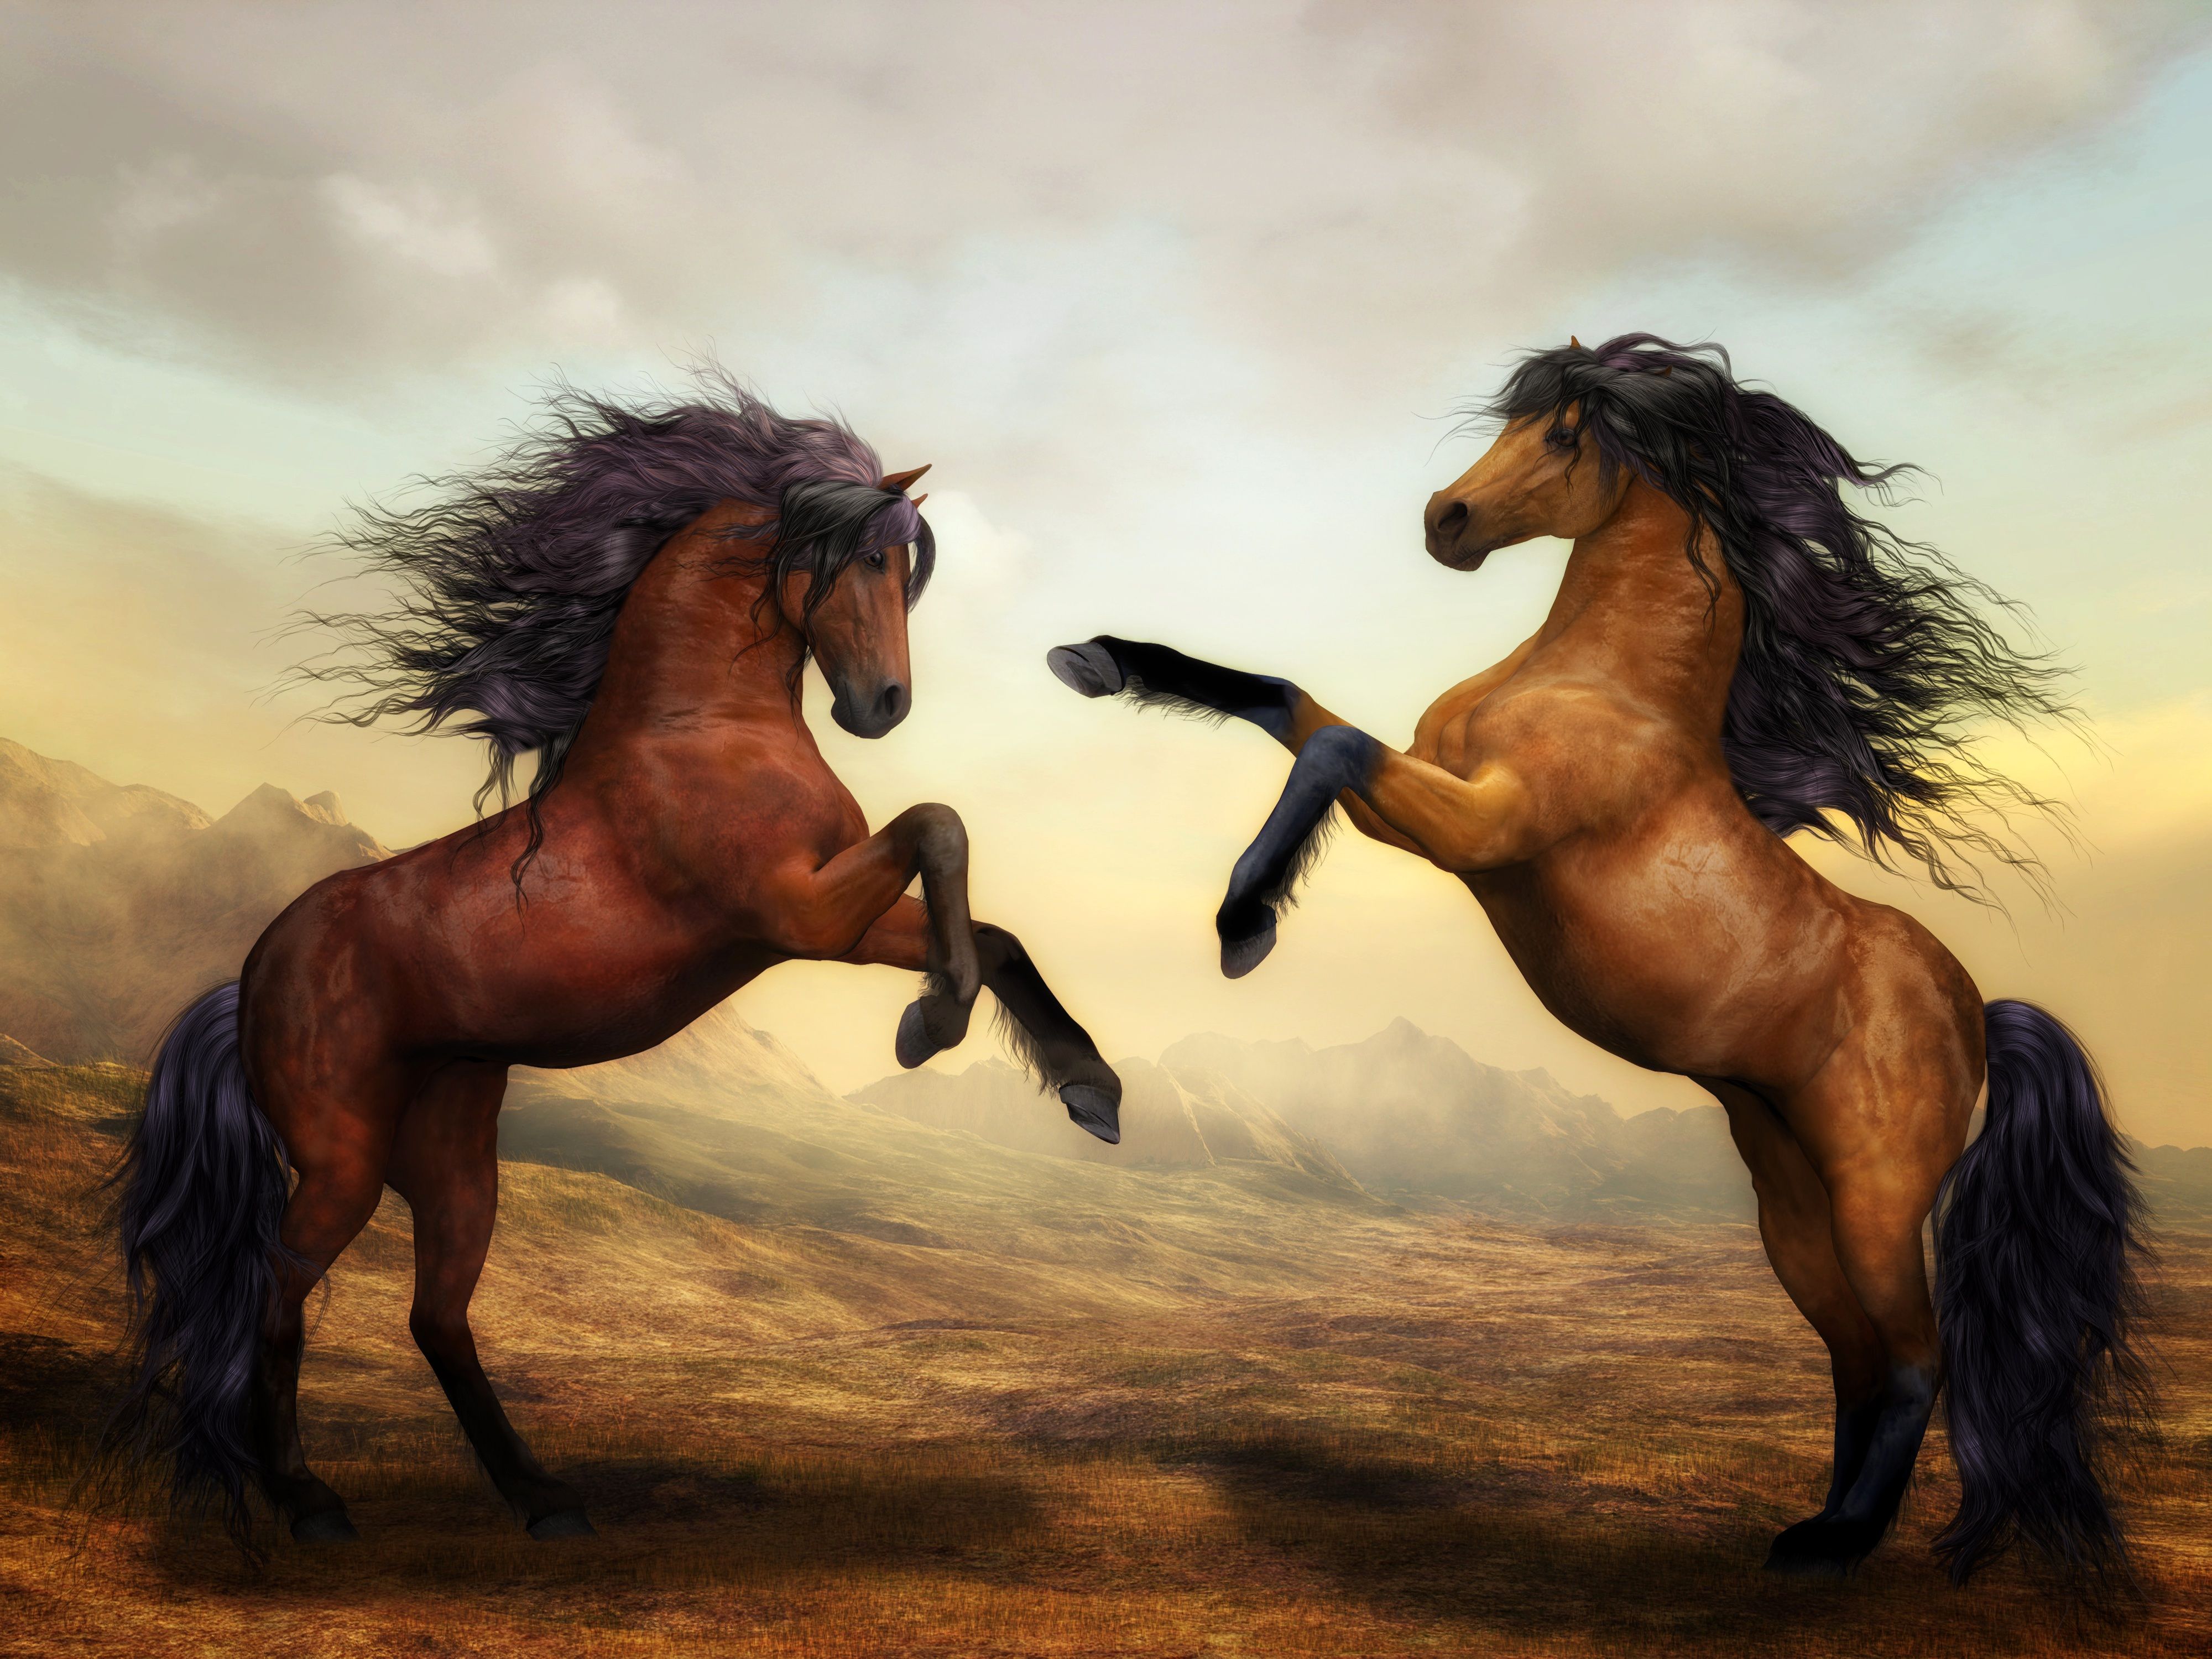 Horses Rearing at each other 4k Ultra HD Wallpaper. Background